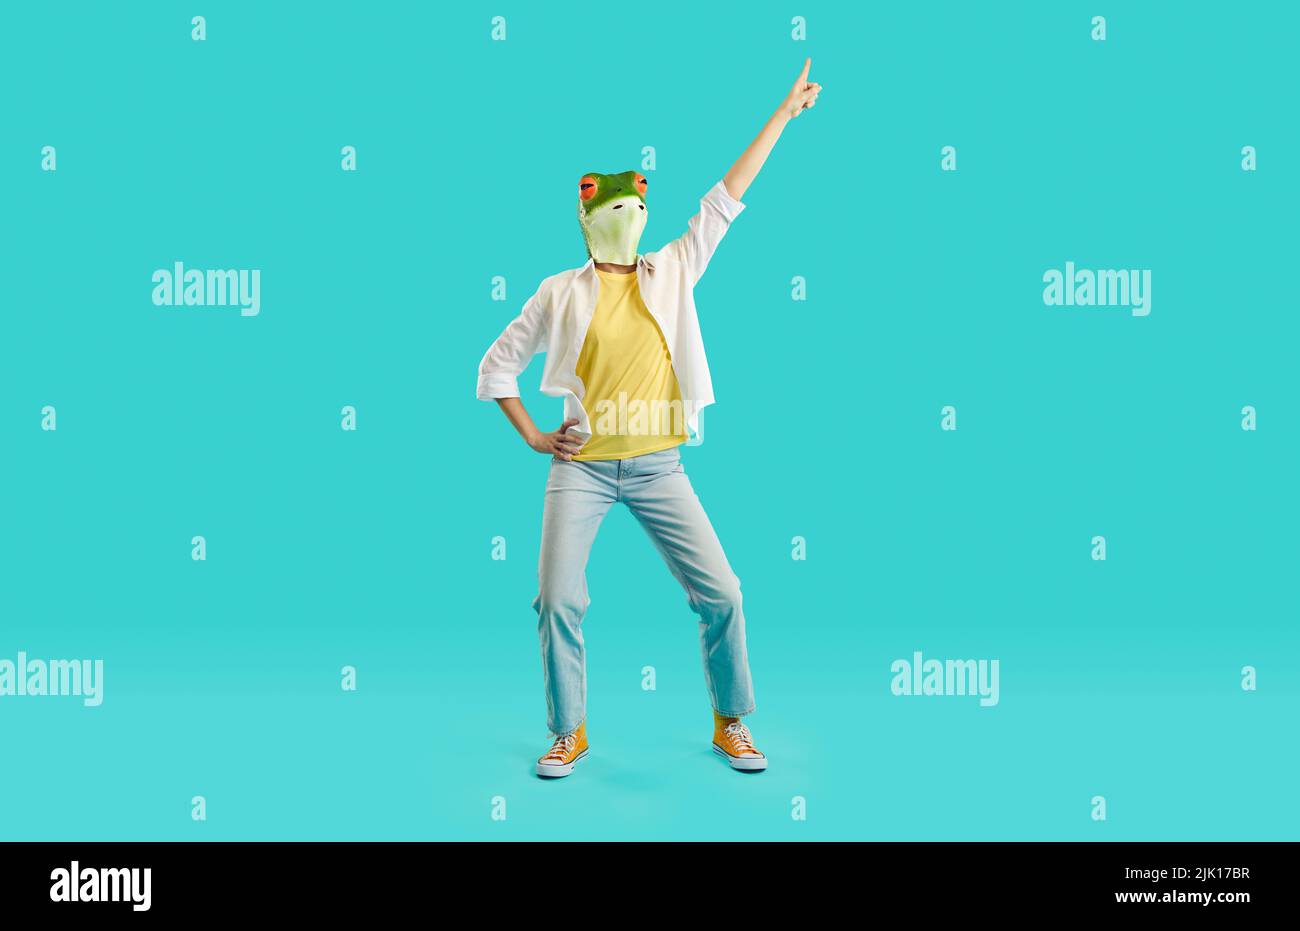 Cheerful woman with frog head shows funny dance moves having fun on light blue background. Stock Photo